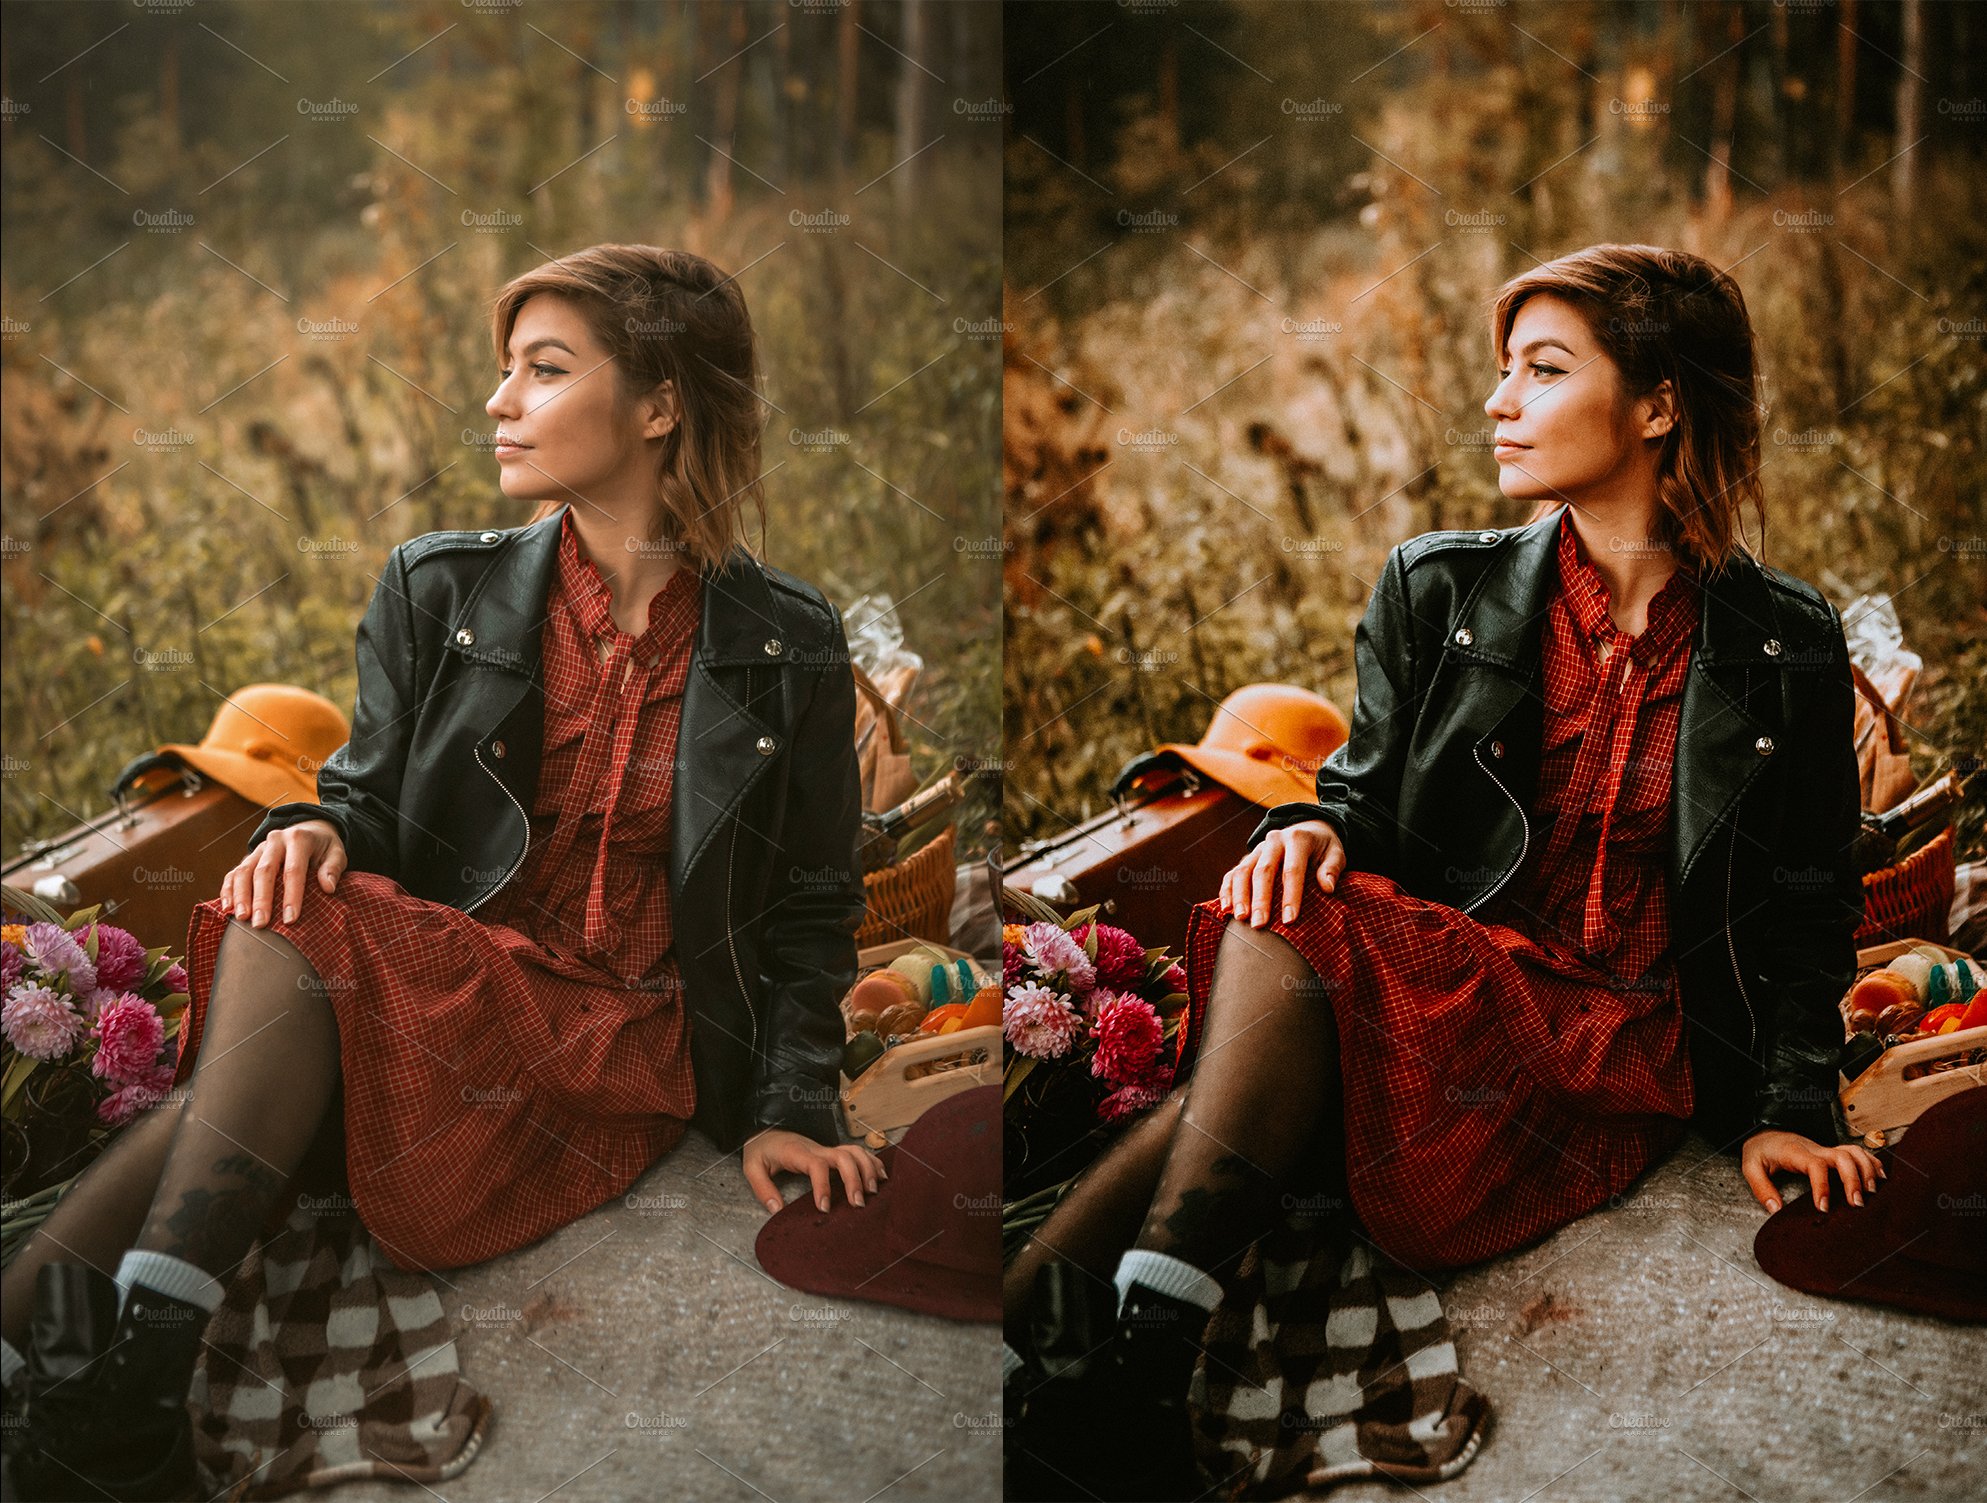 15 x Lightroom Presets, Fall Fashionpreview image.